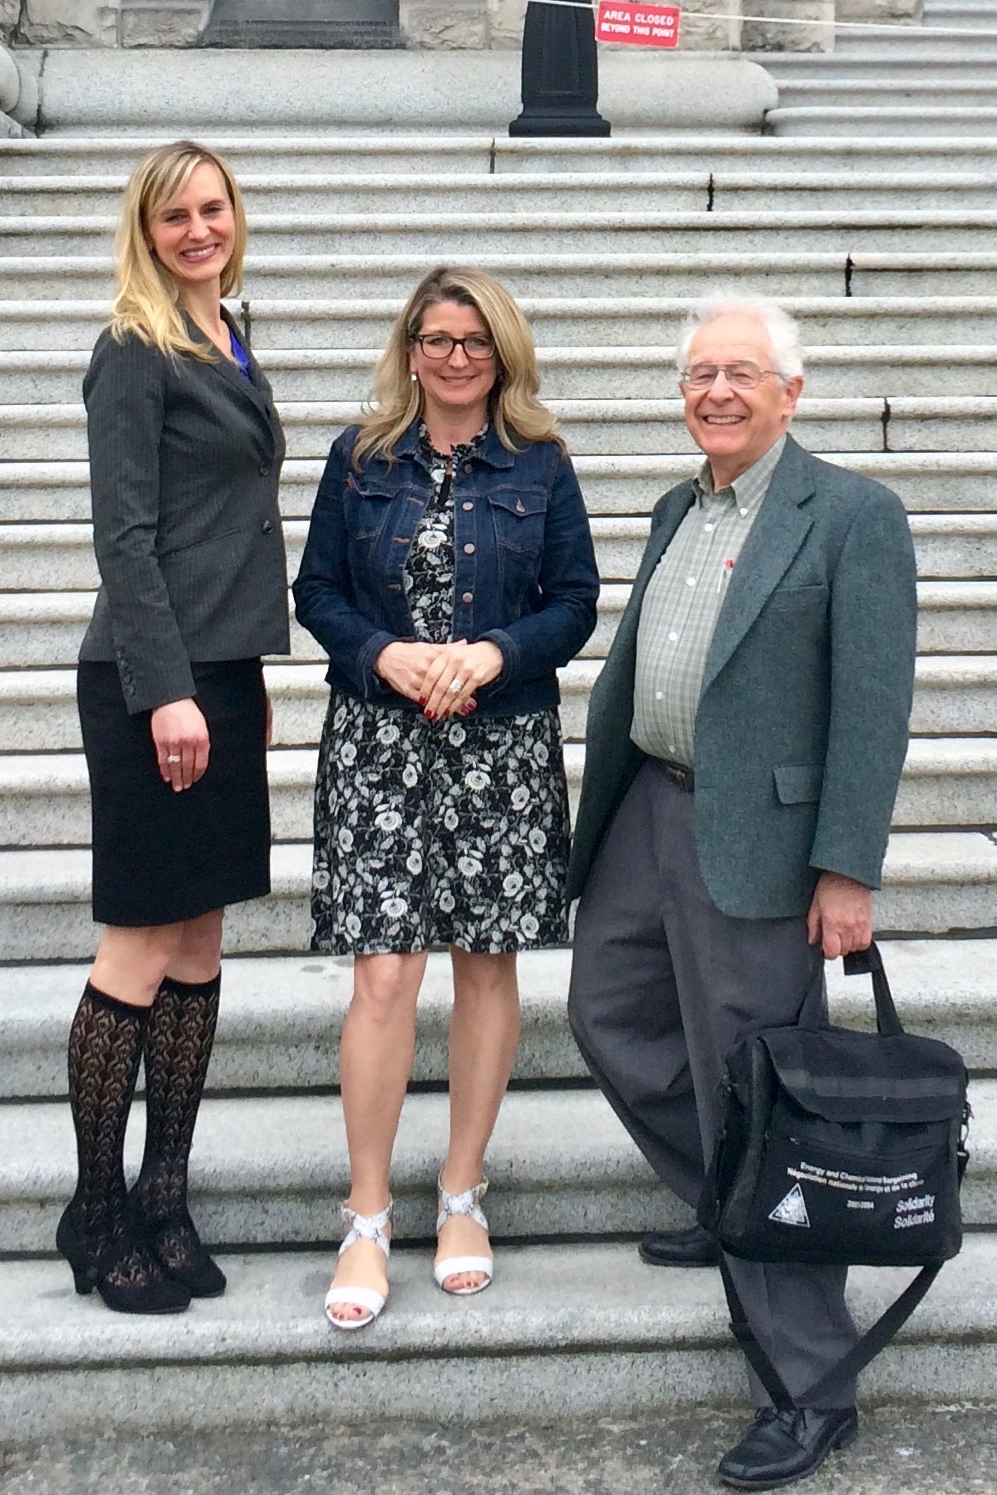 Coalition members David Fairey and Anelyse Weiler meeting with Agriculture Minister Lana Popham on the steps of Parliament in Victoria, BC.